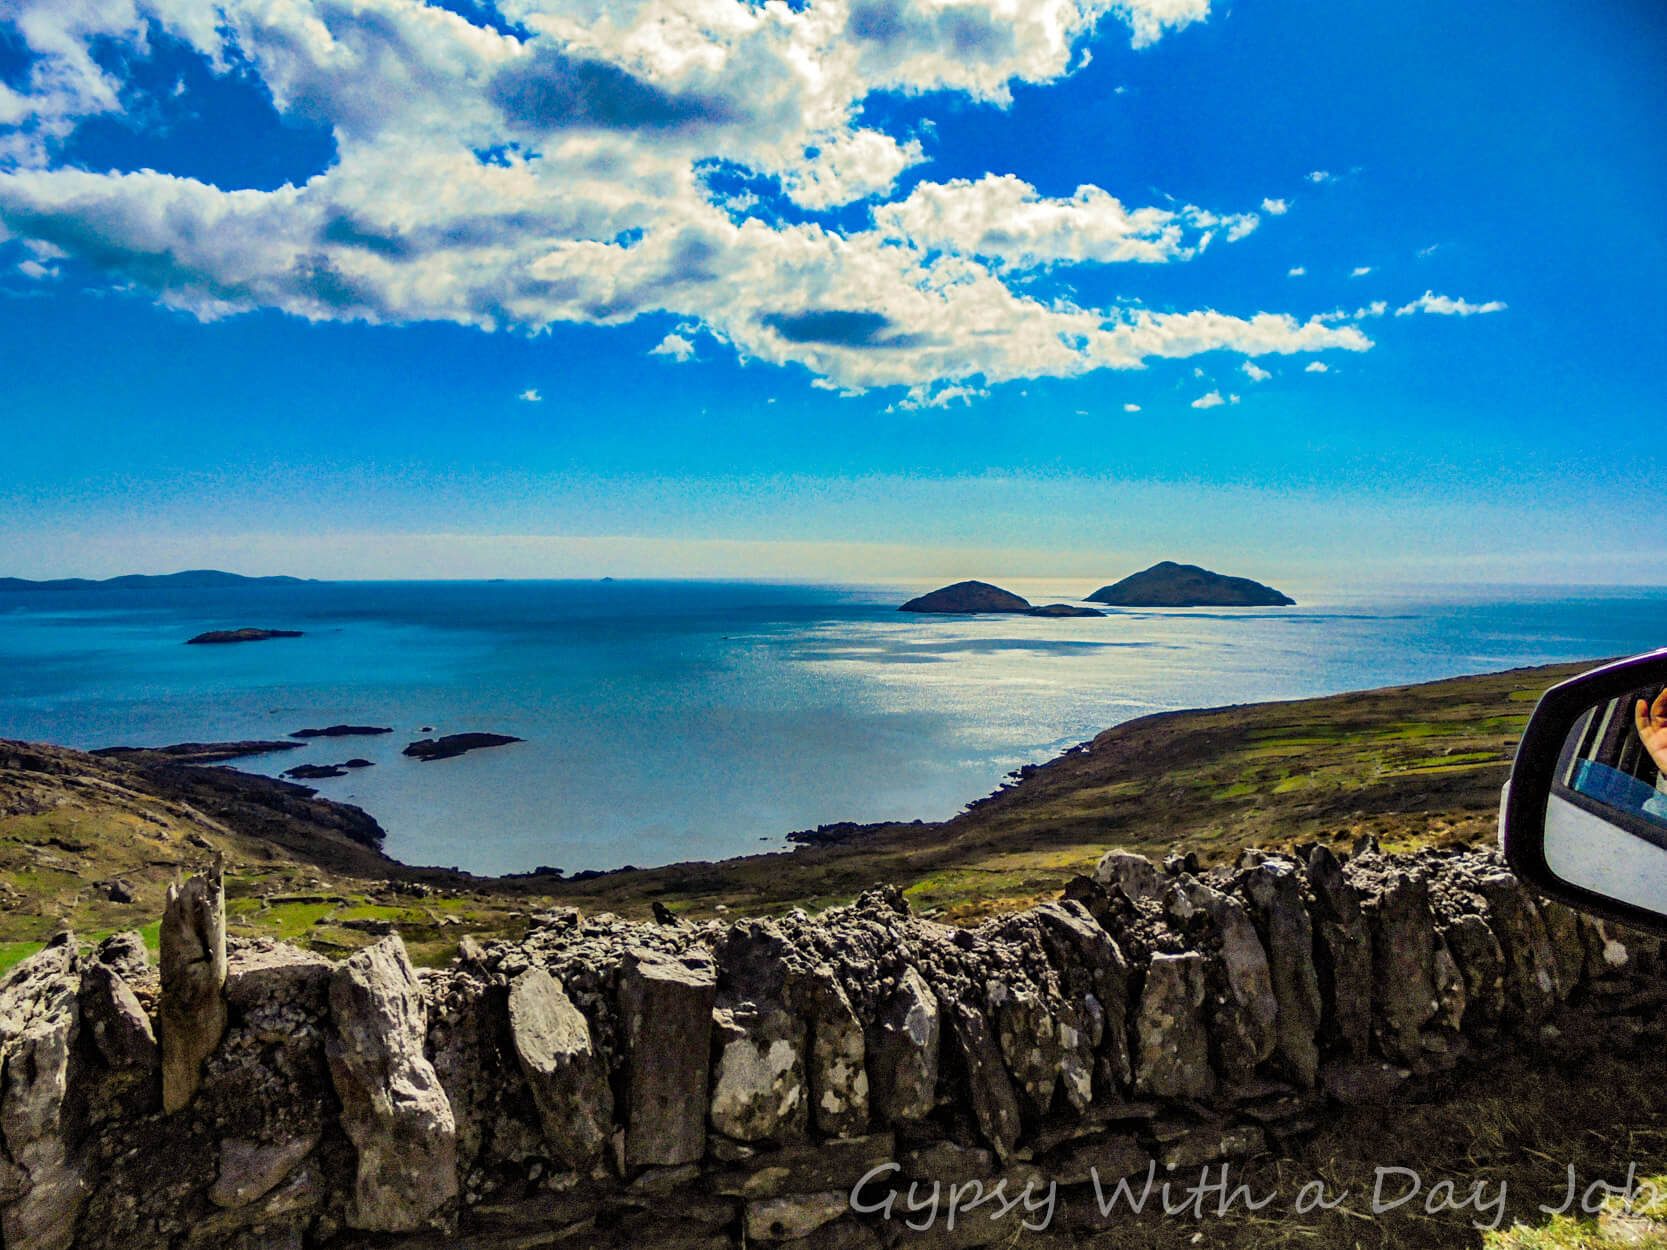 The view from the Skellig Ring, on the Iveragh Peninsula, in Ireland.